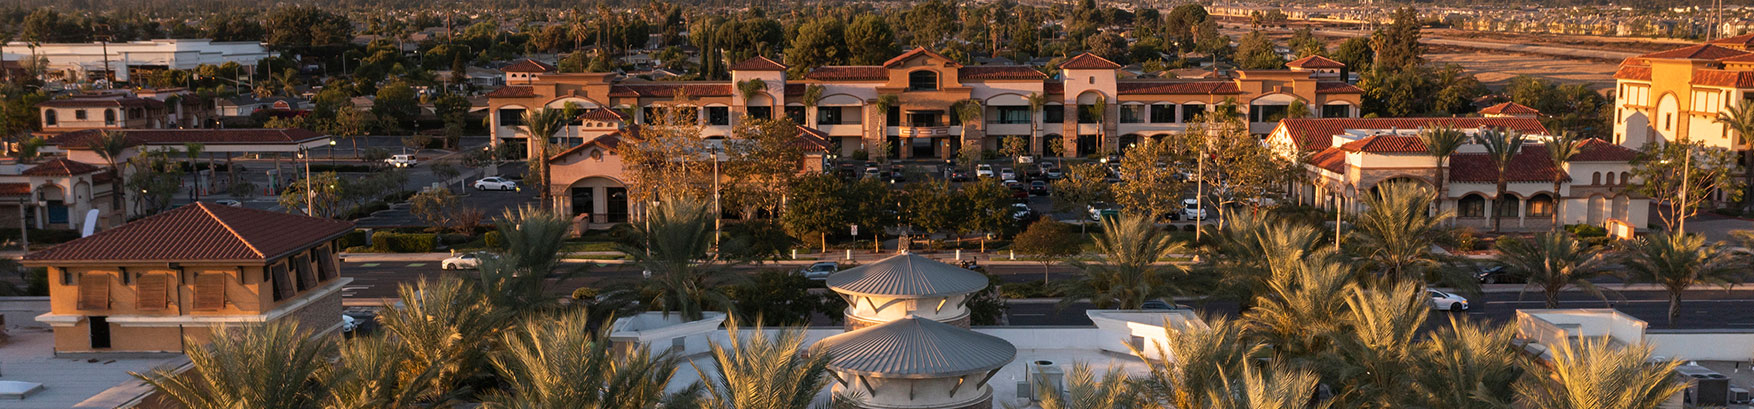 View of buildings and palm trees, an area served by the best Rancho Cucamonga personal injury lawyer